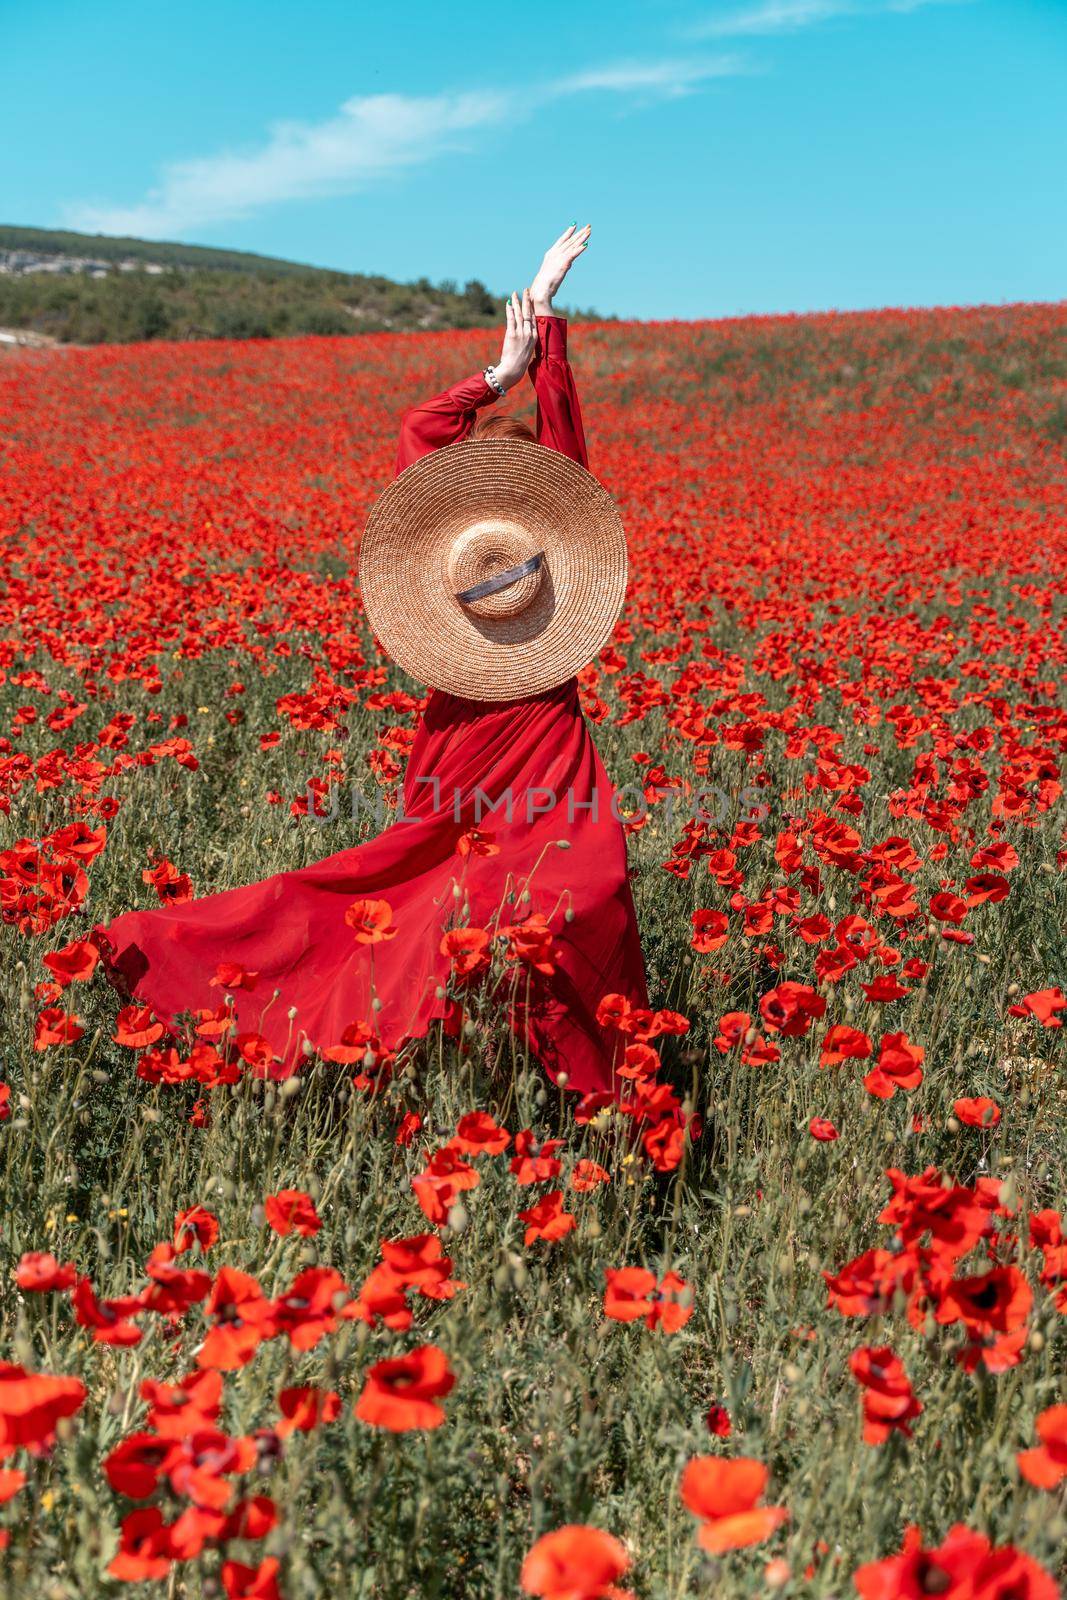 Young woman stands with her back in a long red dress and hat, posing on a large field of red poppies.